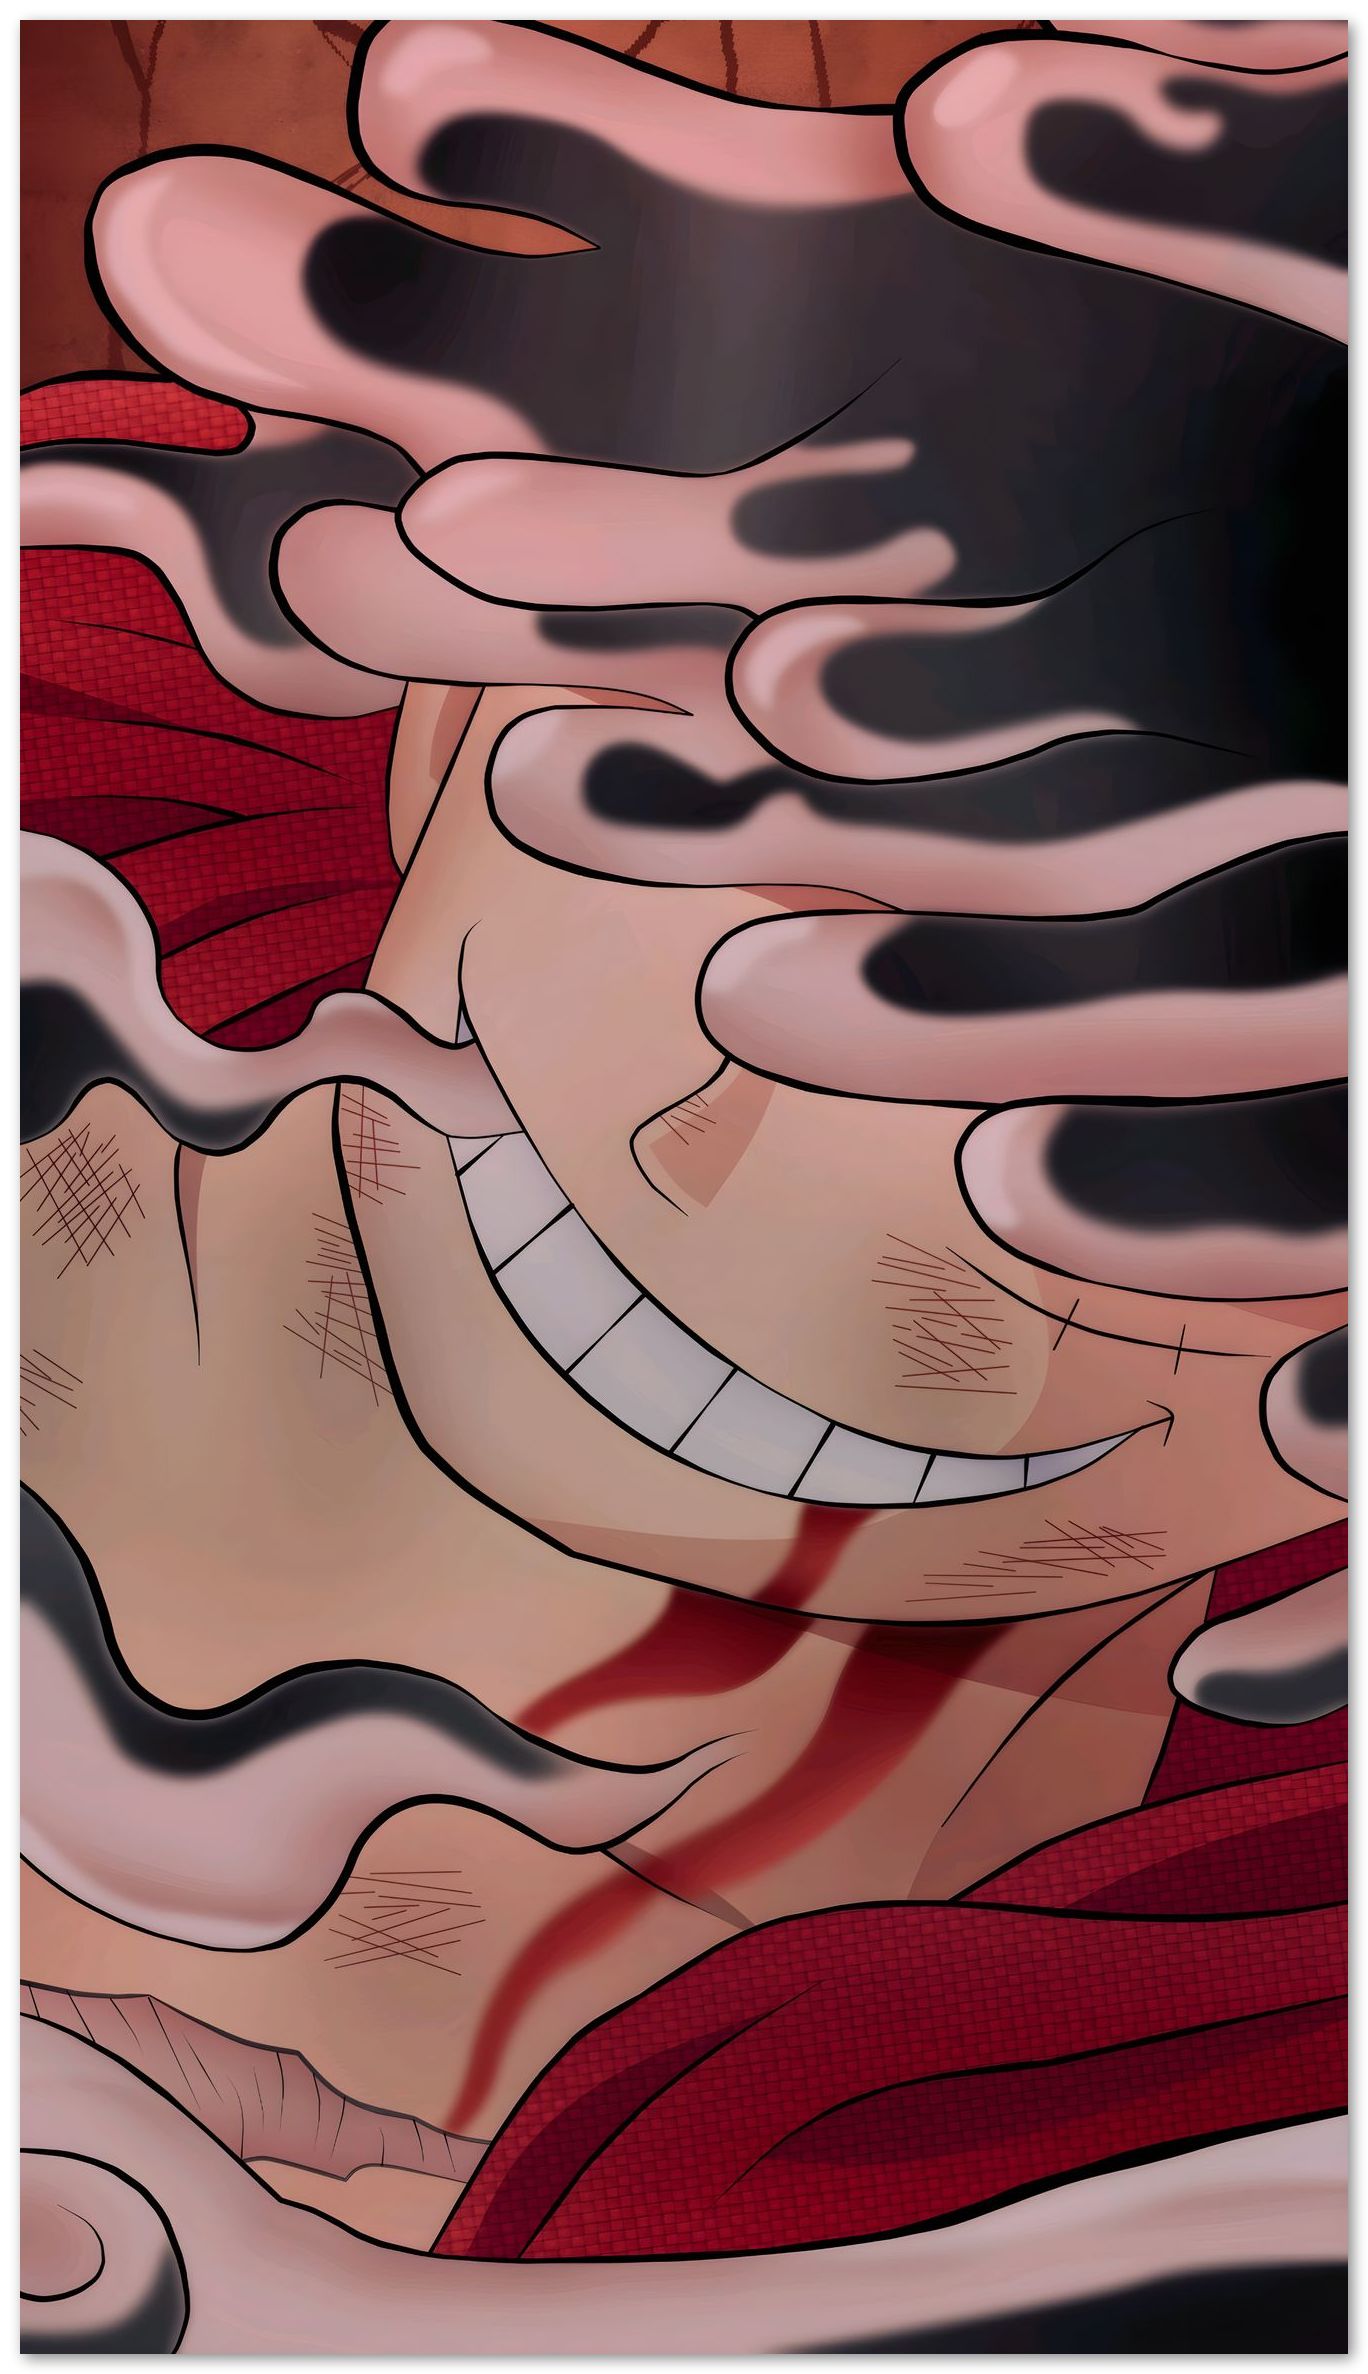 Mongkey D Luffy Smile go to Gear 5 - @Tanjidor